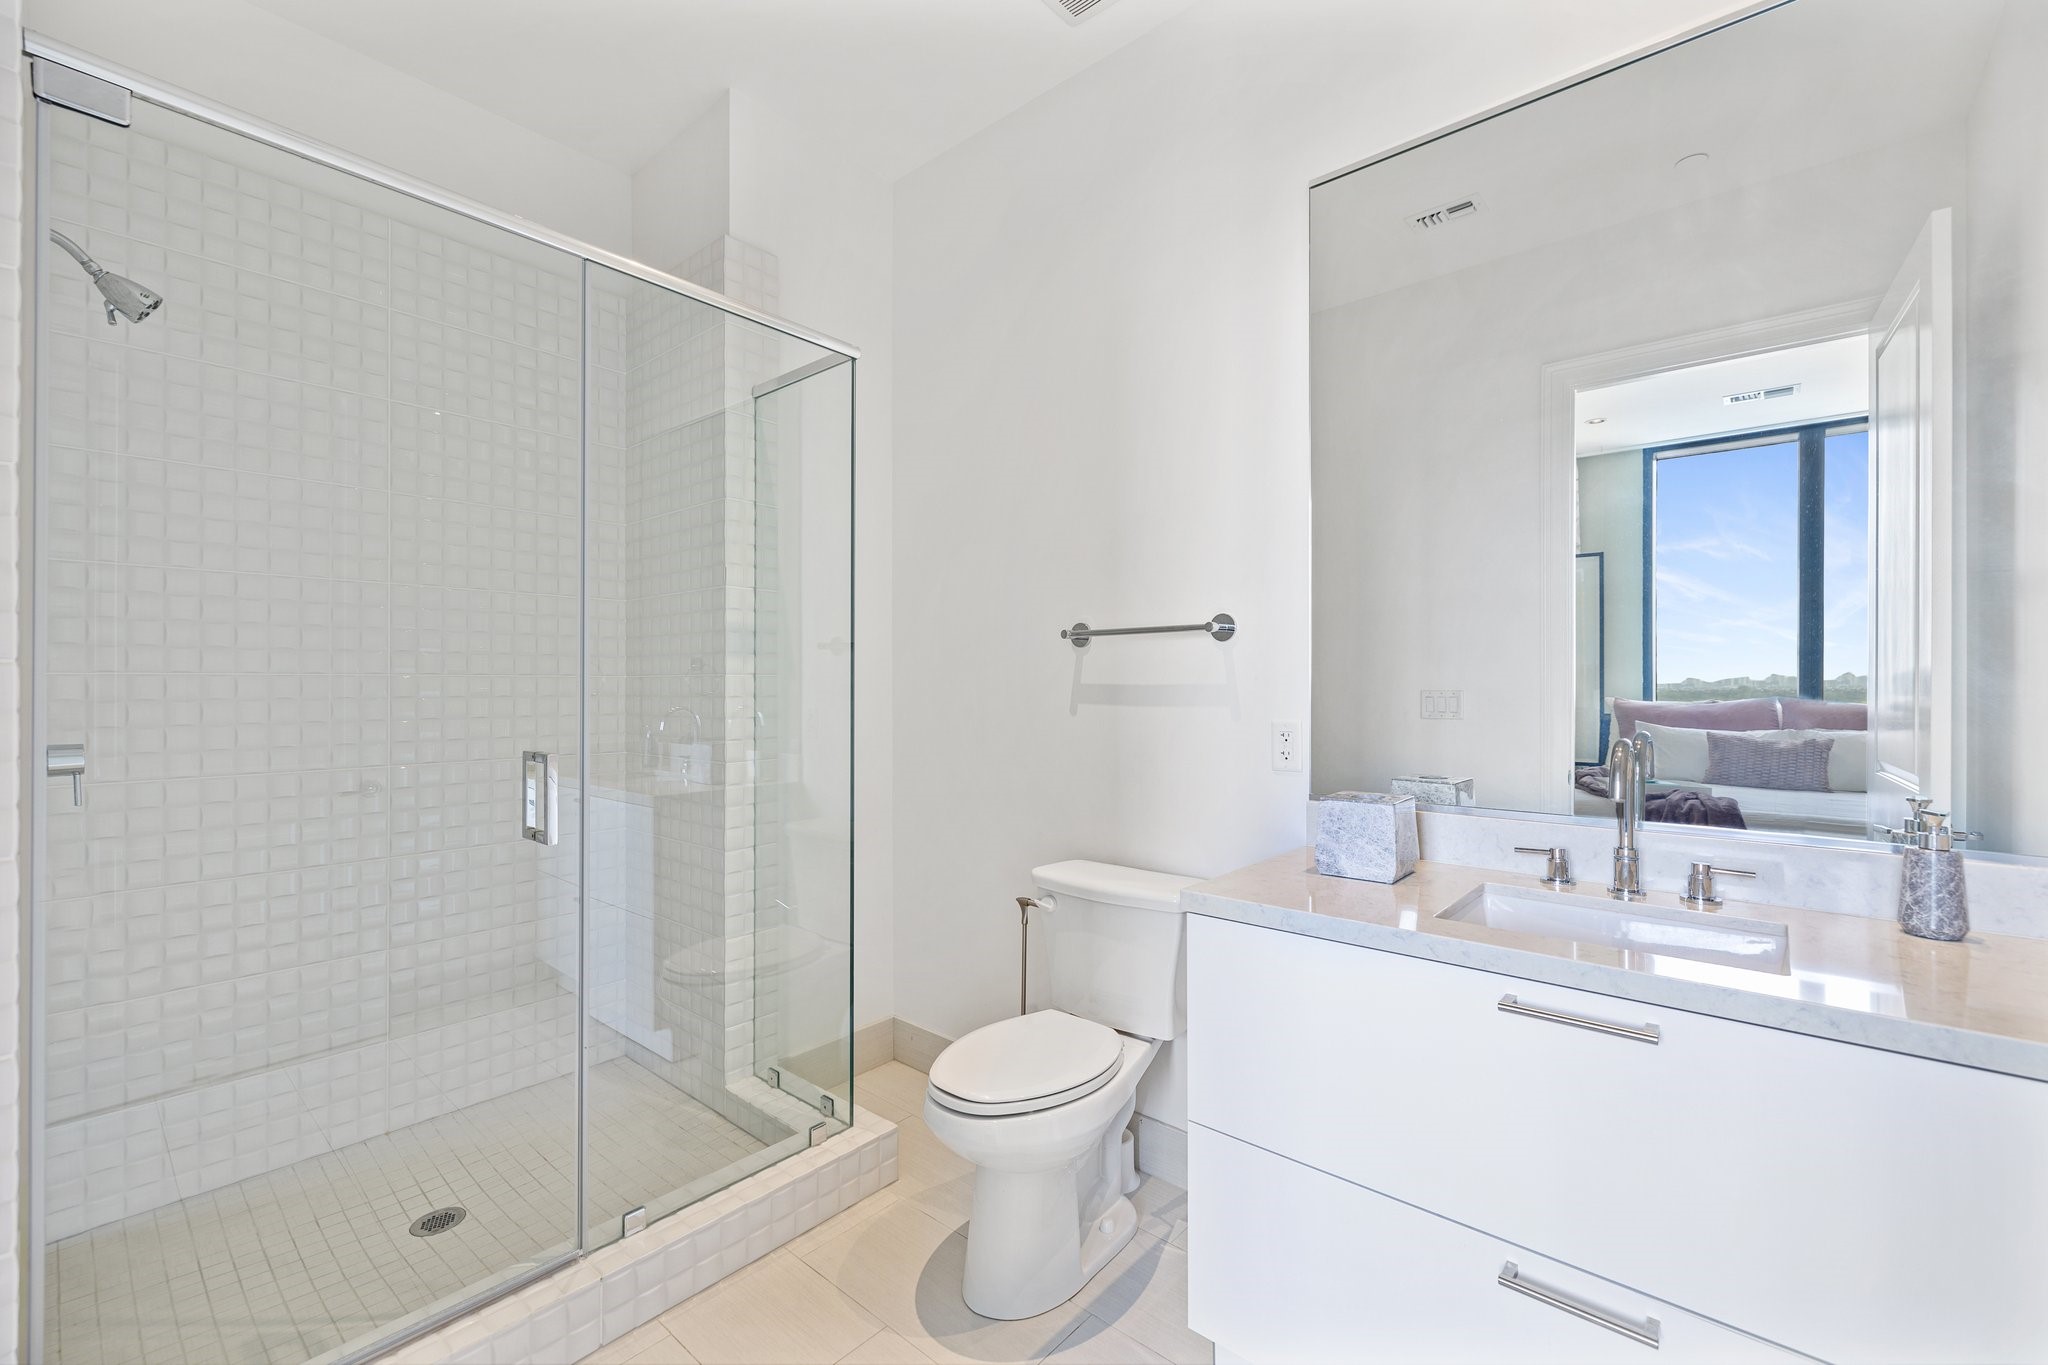 An ensuite attached to a secondary bedroom, featuring a spacious and luxurious stand-up shower with meticulous tile detailing and contemporary fixtures. The room radiates with clean lines and a harmonious design.